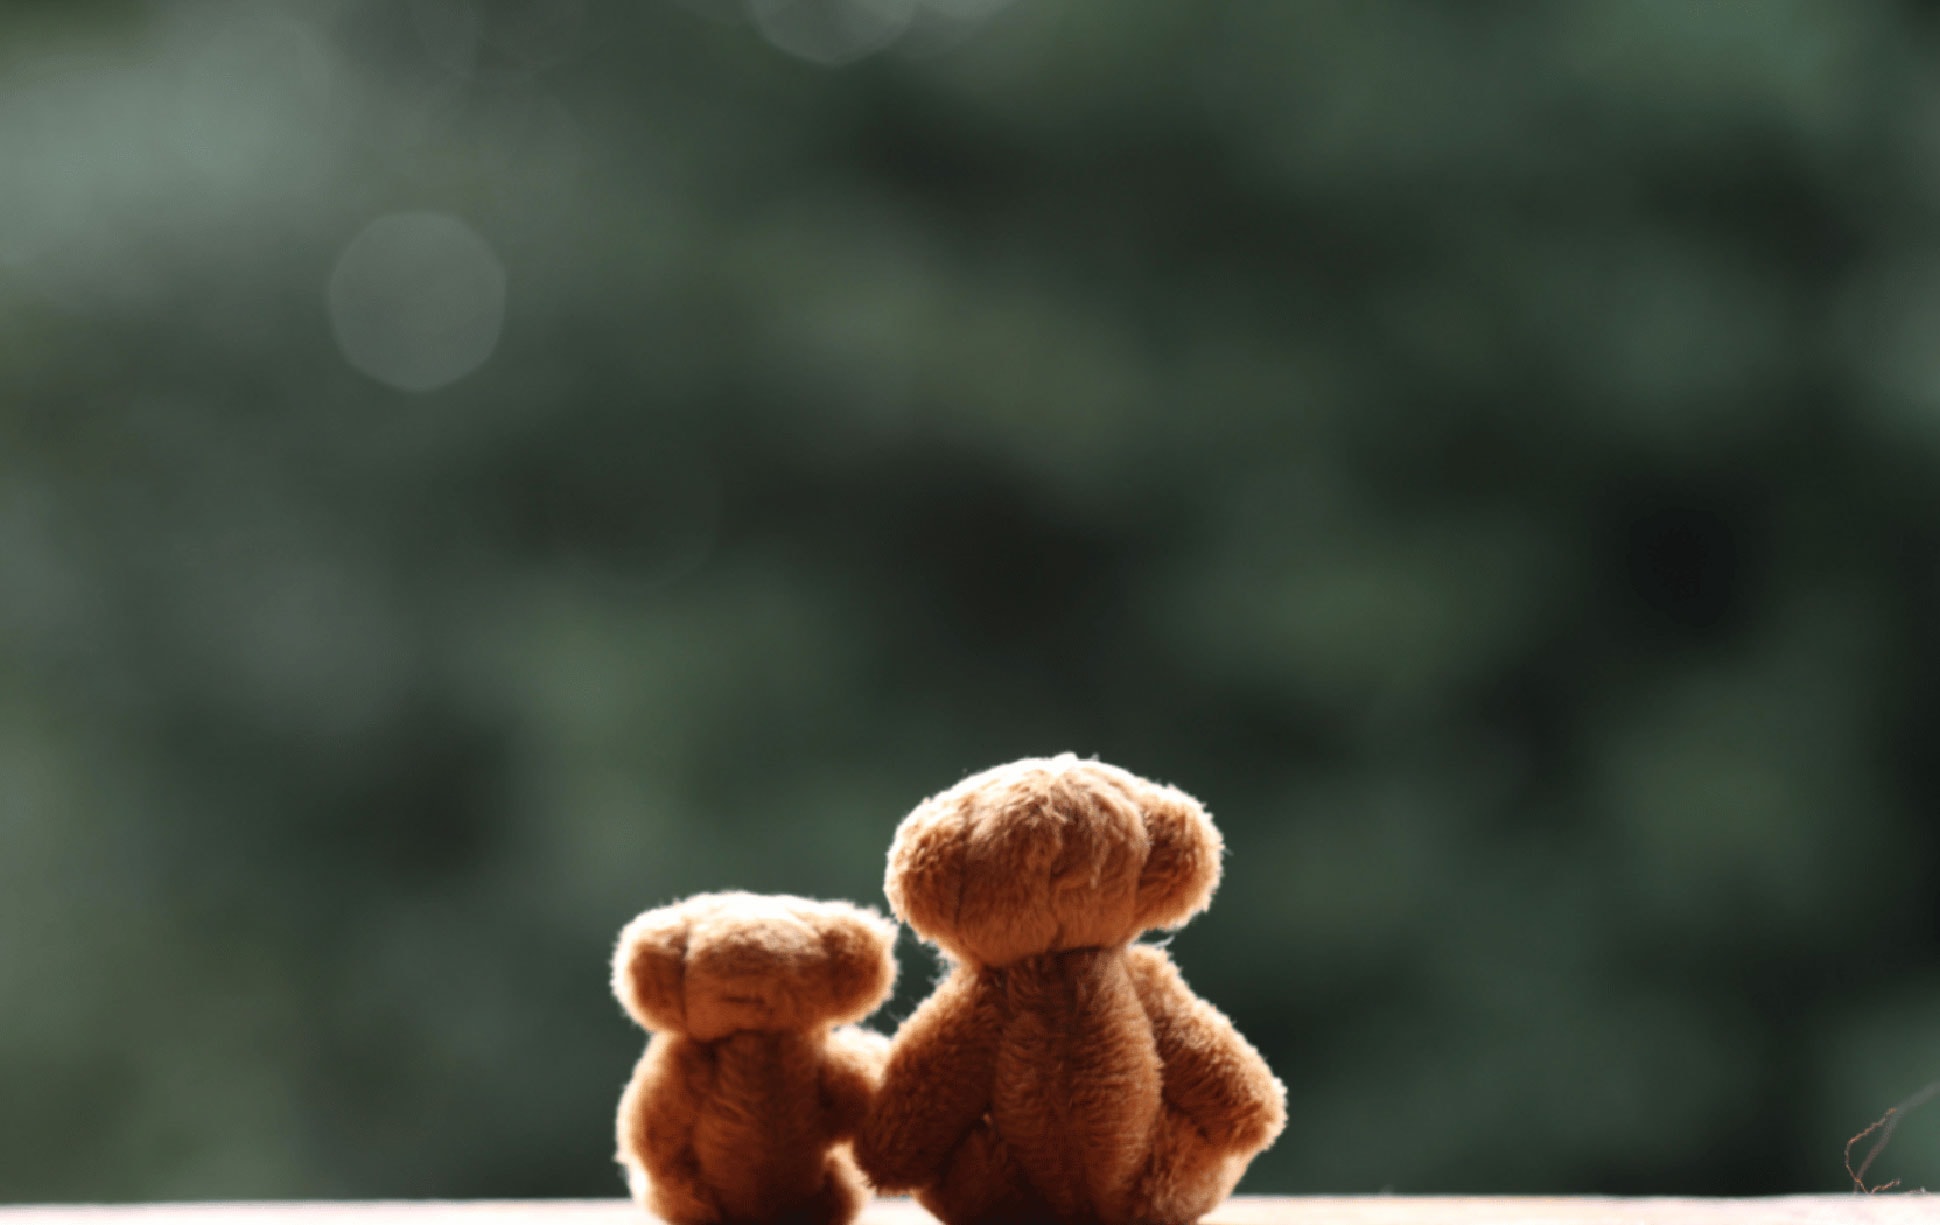 Two teddy bears facing outwards, one lightly larger than the other and appear to be holding hands